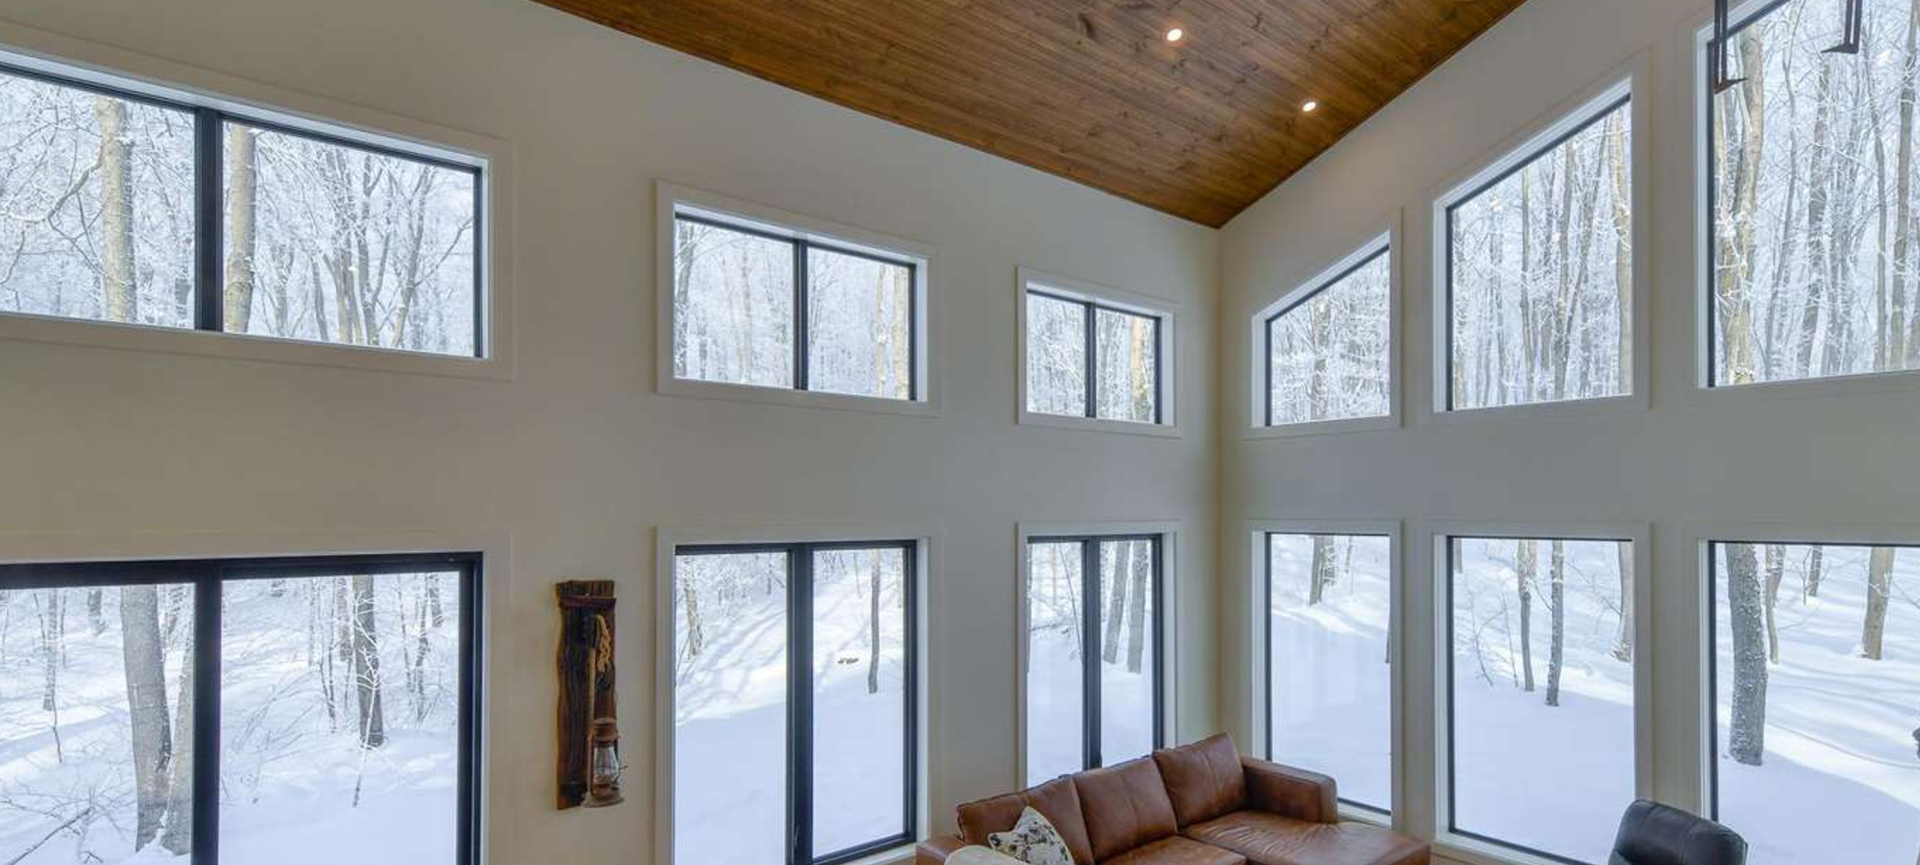 Mystical Bluff Cozy cottage interior with expansive windows revealing a snowy landscape, symbolizing winter preparedness by Jayne's Luxury Rentals